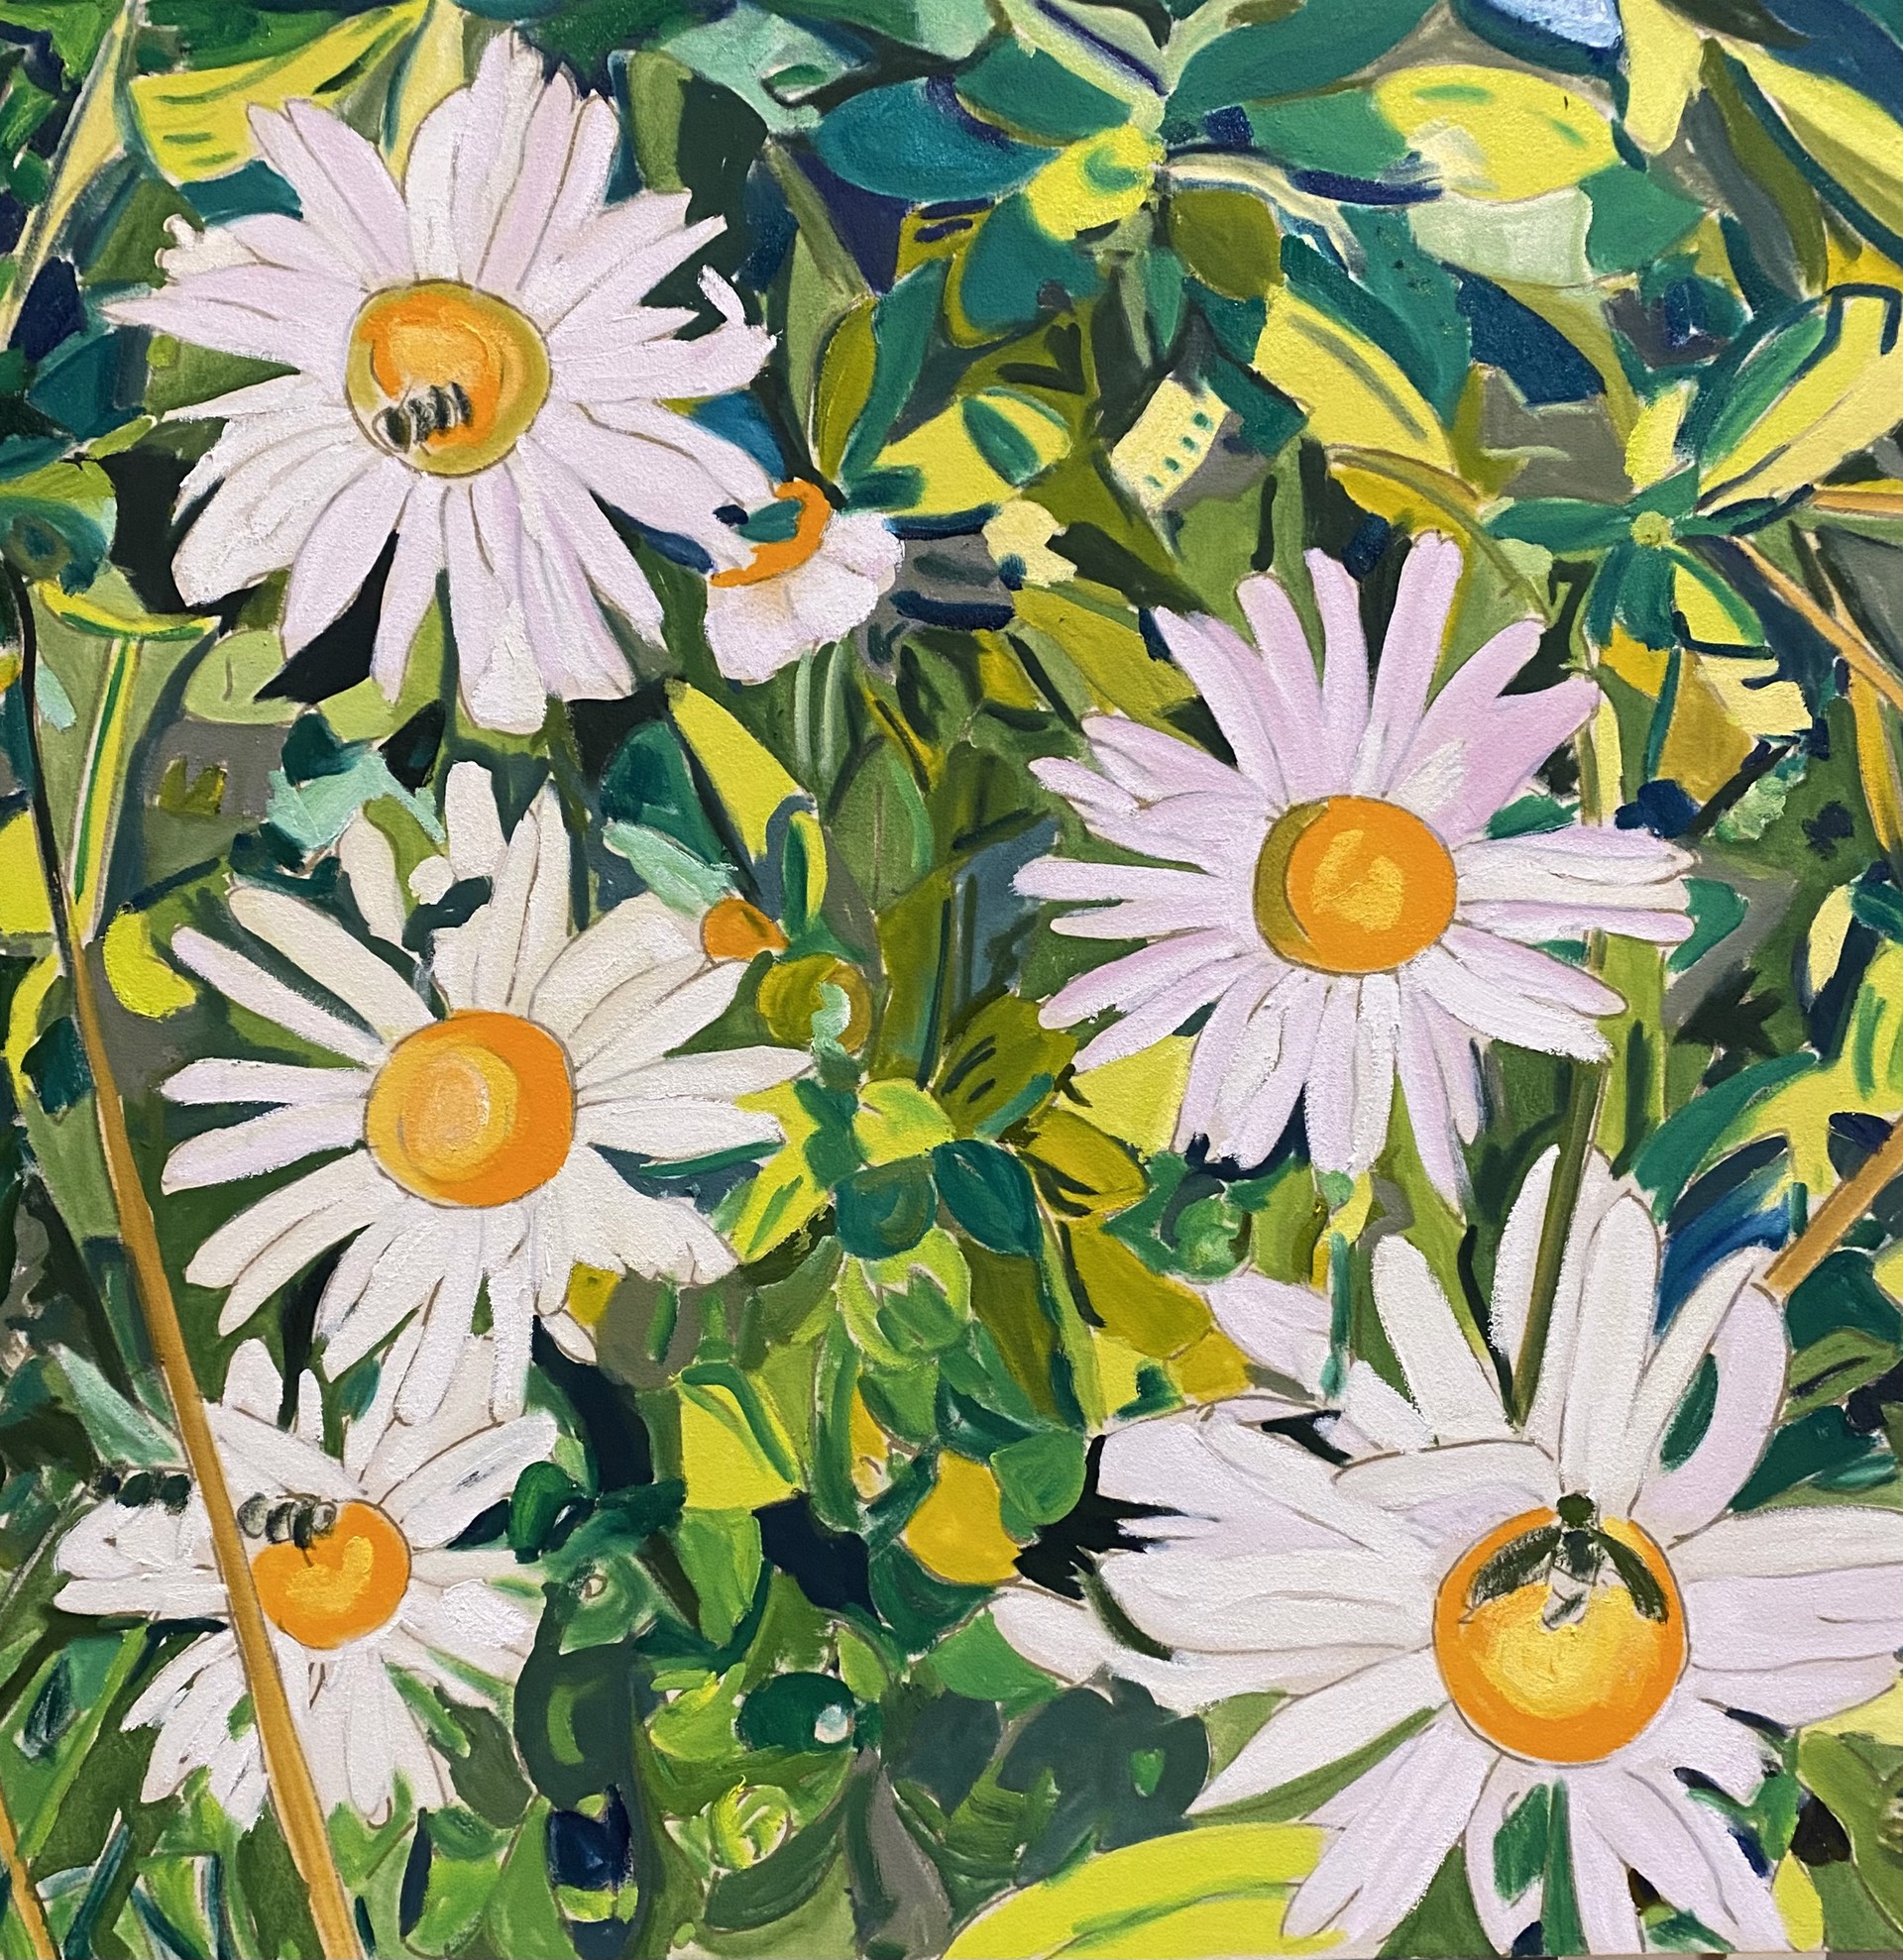 Pollinating Daisy's by Maggie Bandstra